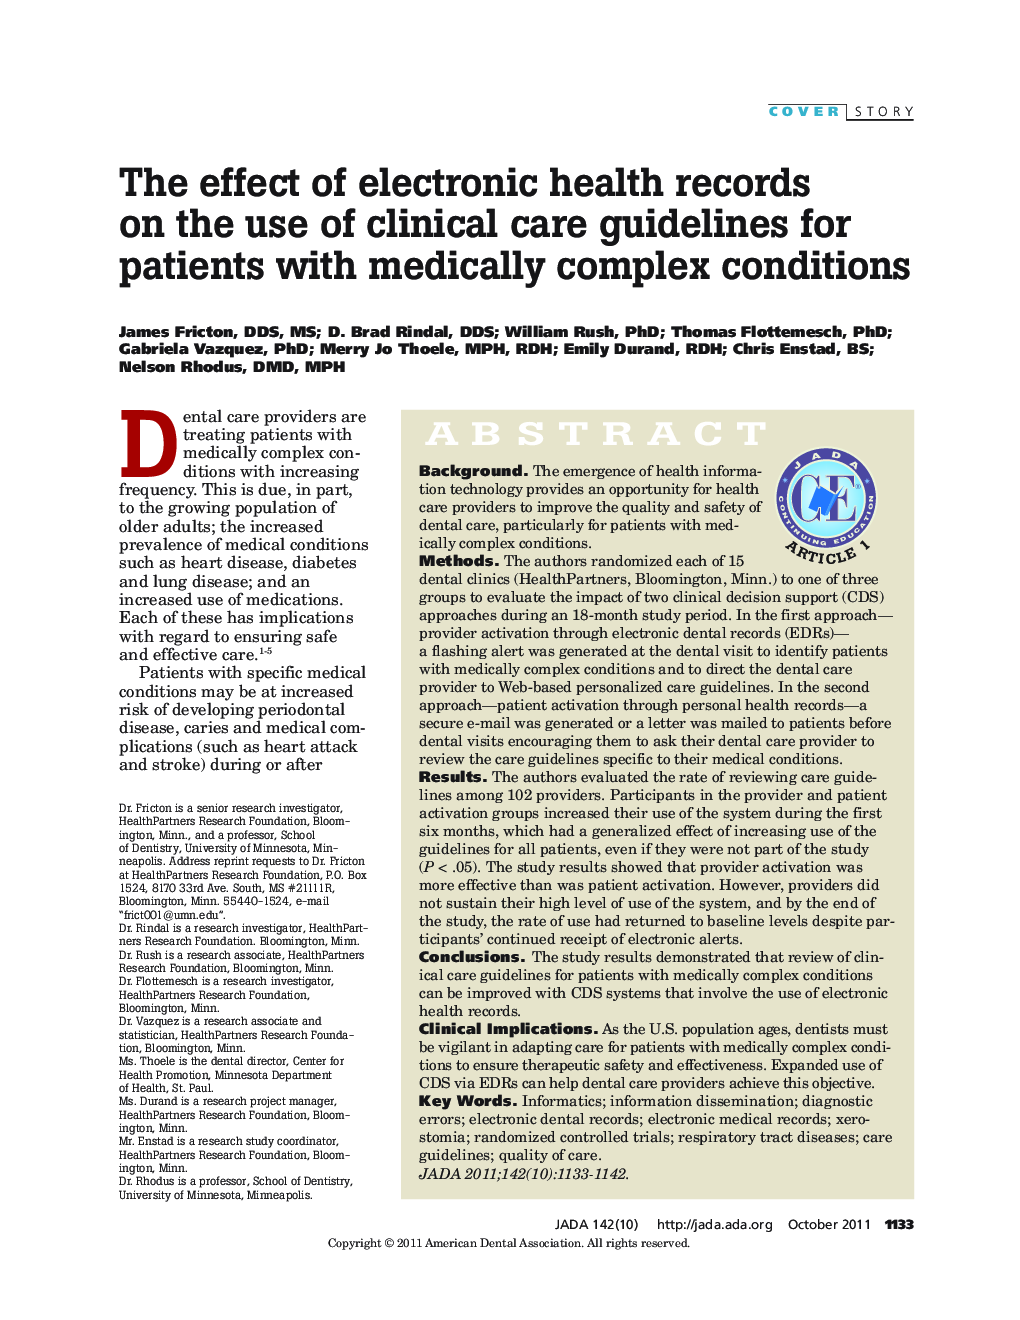 The effect of electronic health records on the use of clinical care guidelines for patients with medically complex conditions 